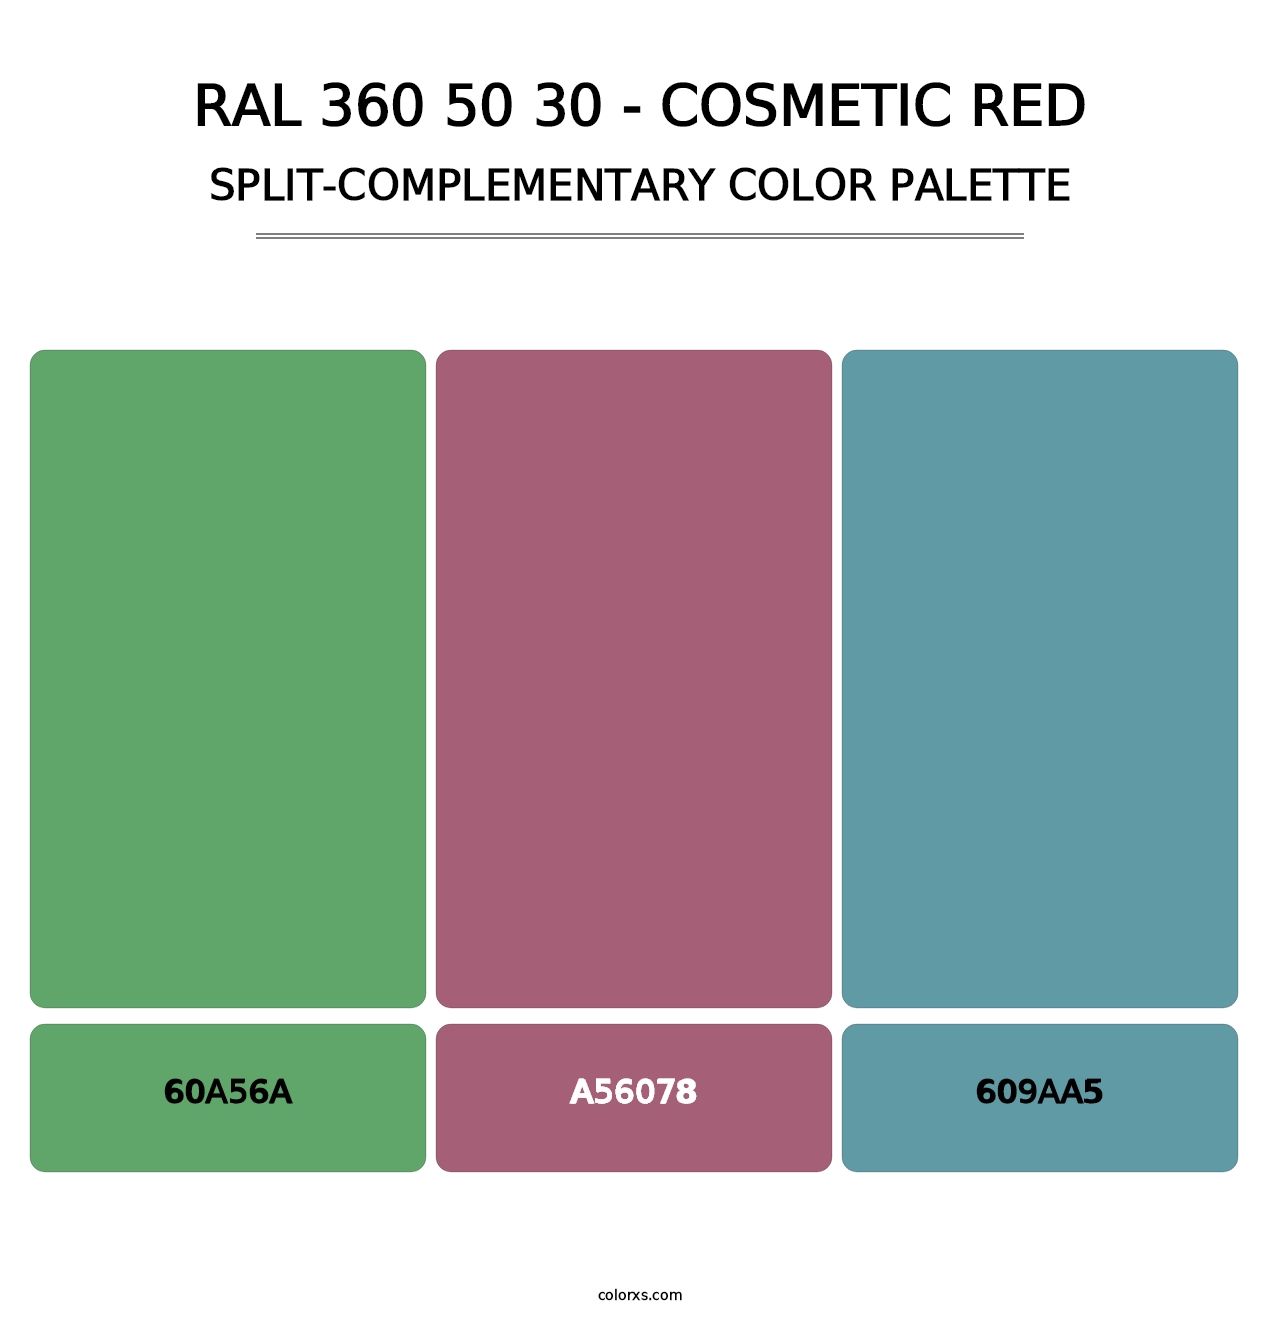 RAL 360 50 30 - Cosmetic Red - Split-Complementary Color Palette